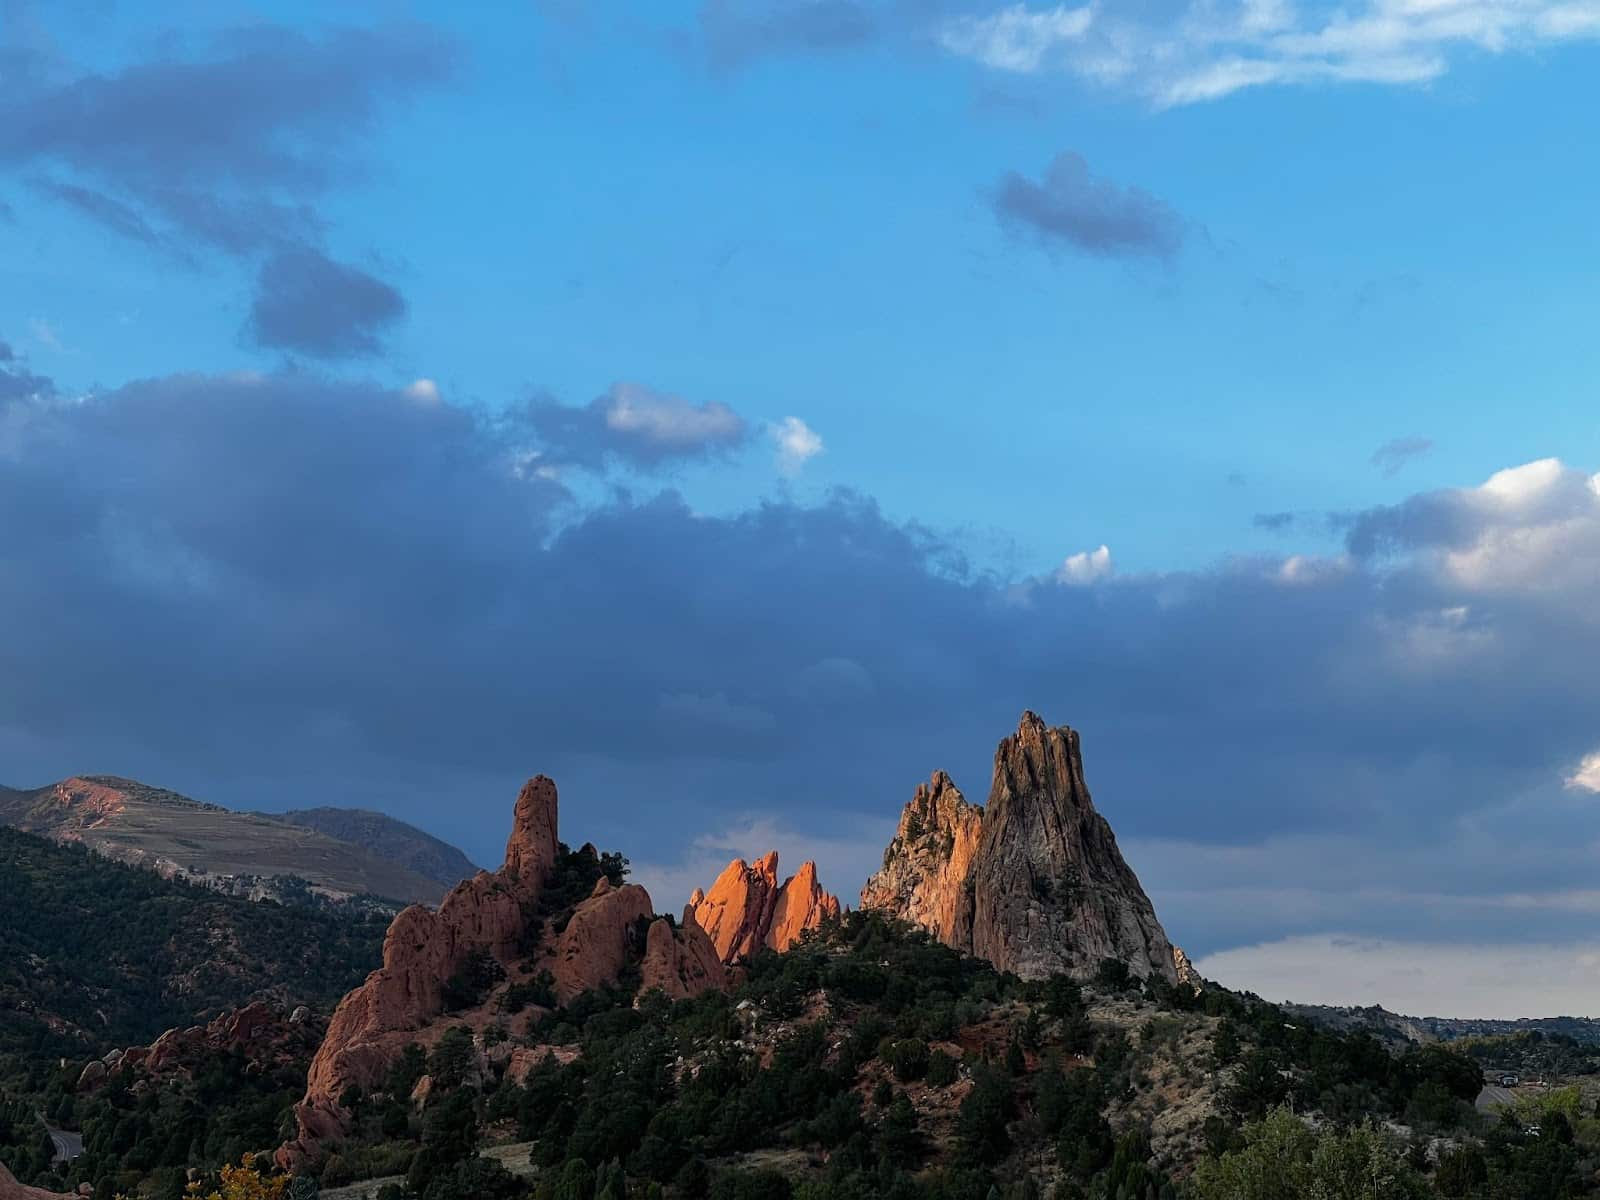 A rock range in Garden of the Gods in Colorado Springs, CO., beneath a blue sky filled with clouds